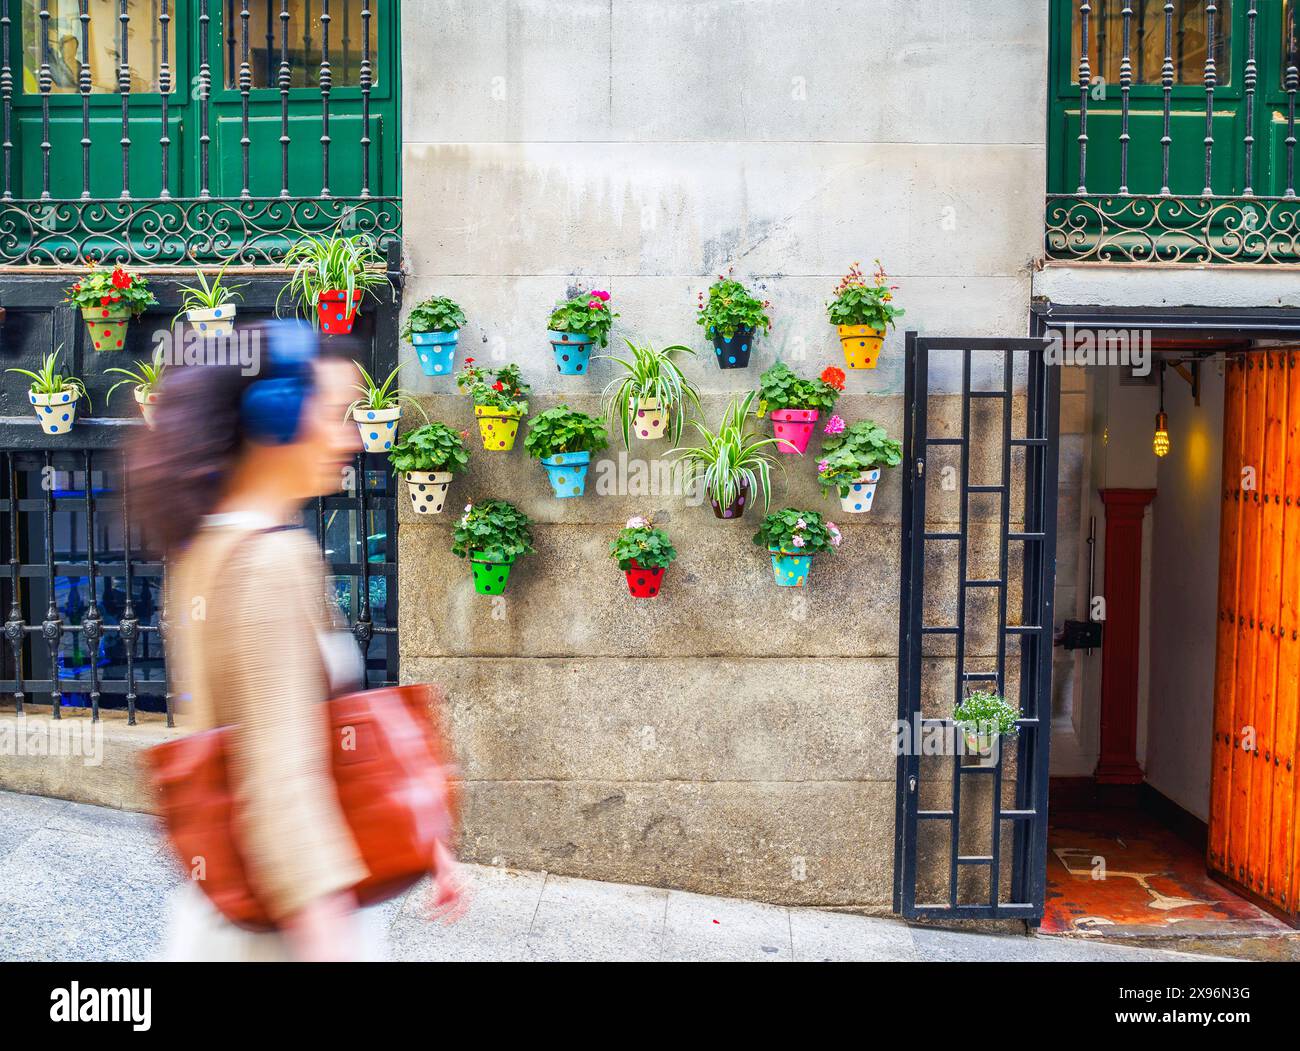 A girl with earphones walking past a wall adorned with colorful polka-dotted flower pots and plants. Stock Photo